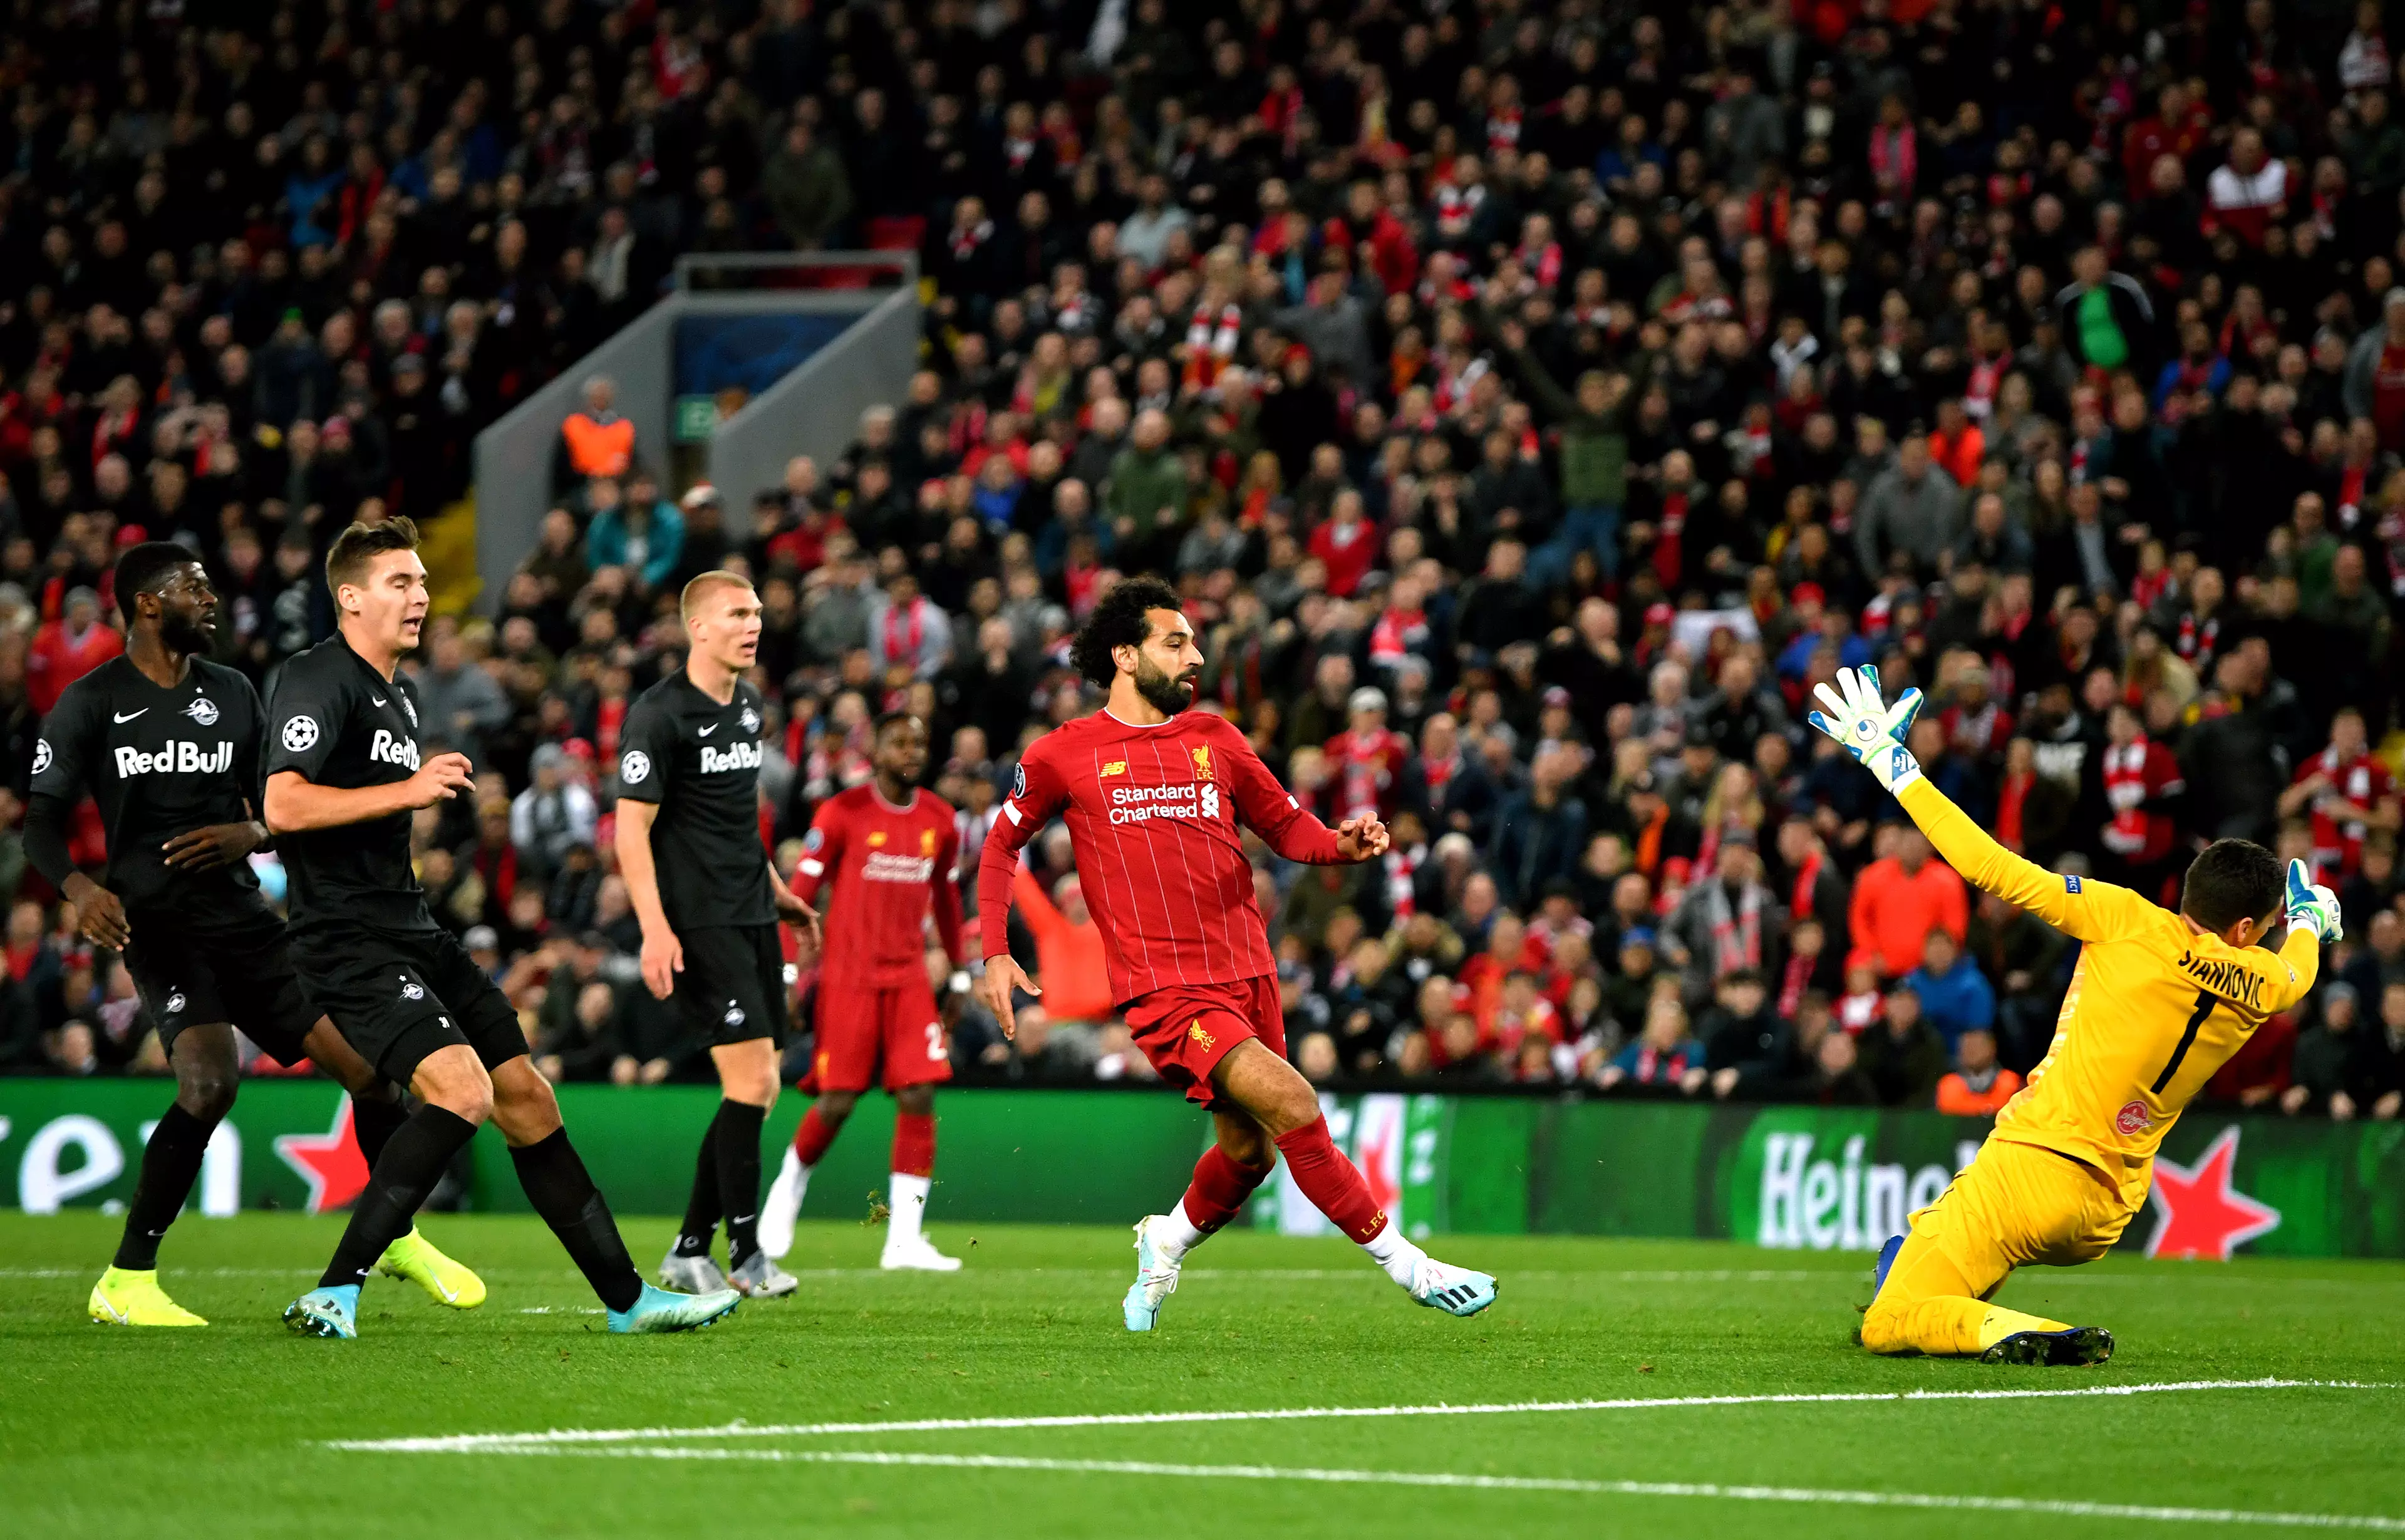 Liverpool needed a late goal from Mo Salah after seeing their three-goal lead wiped out by Salzburg